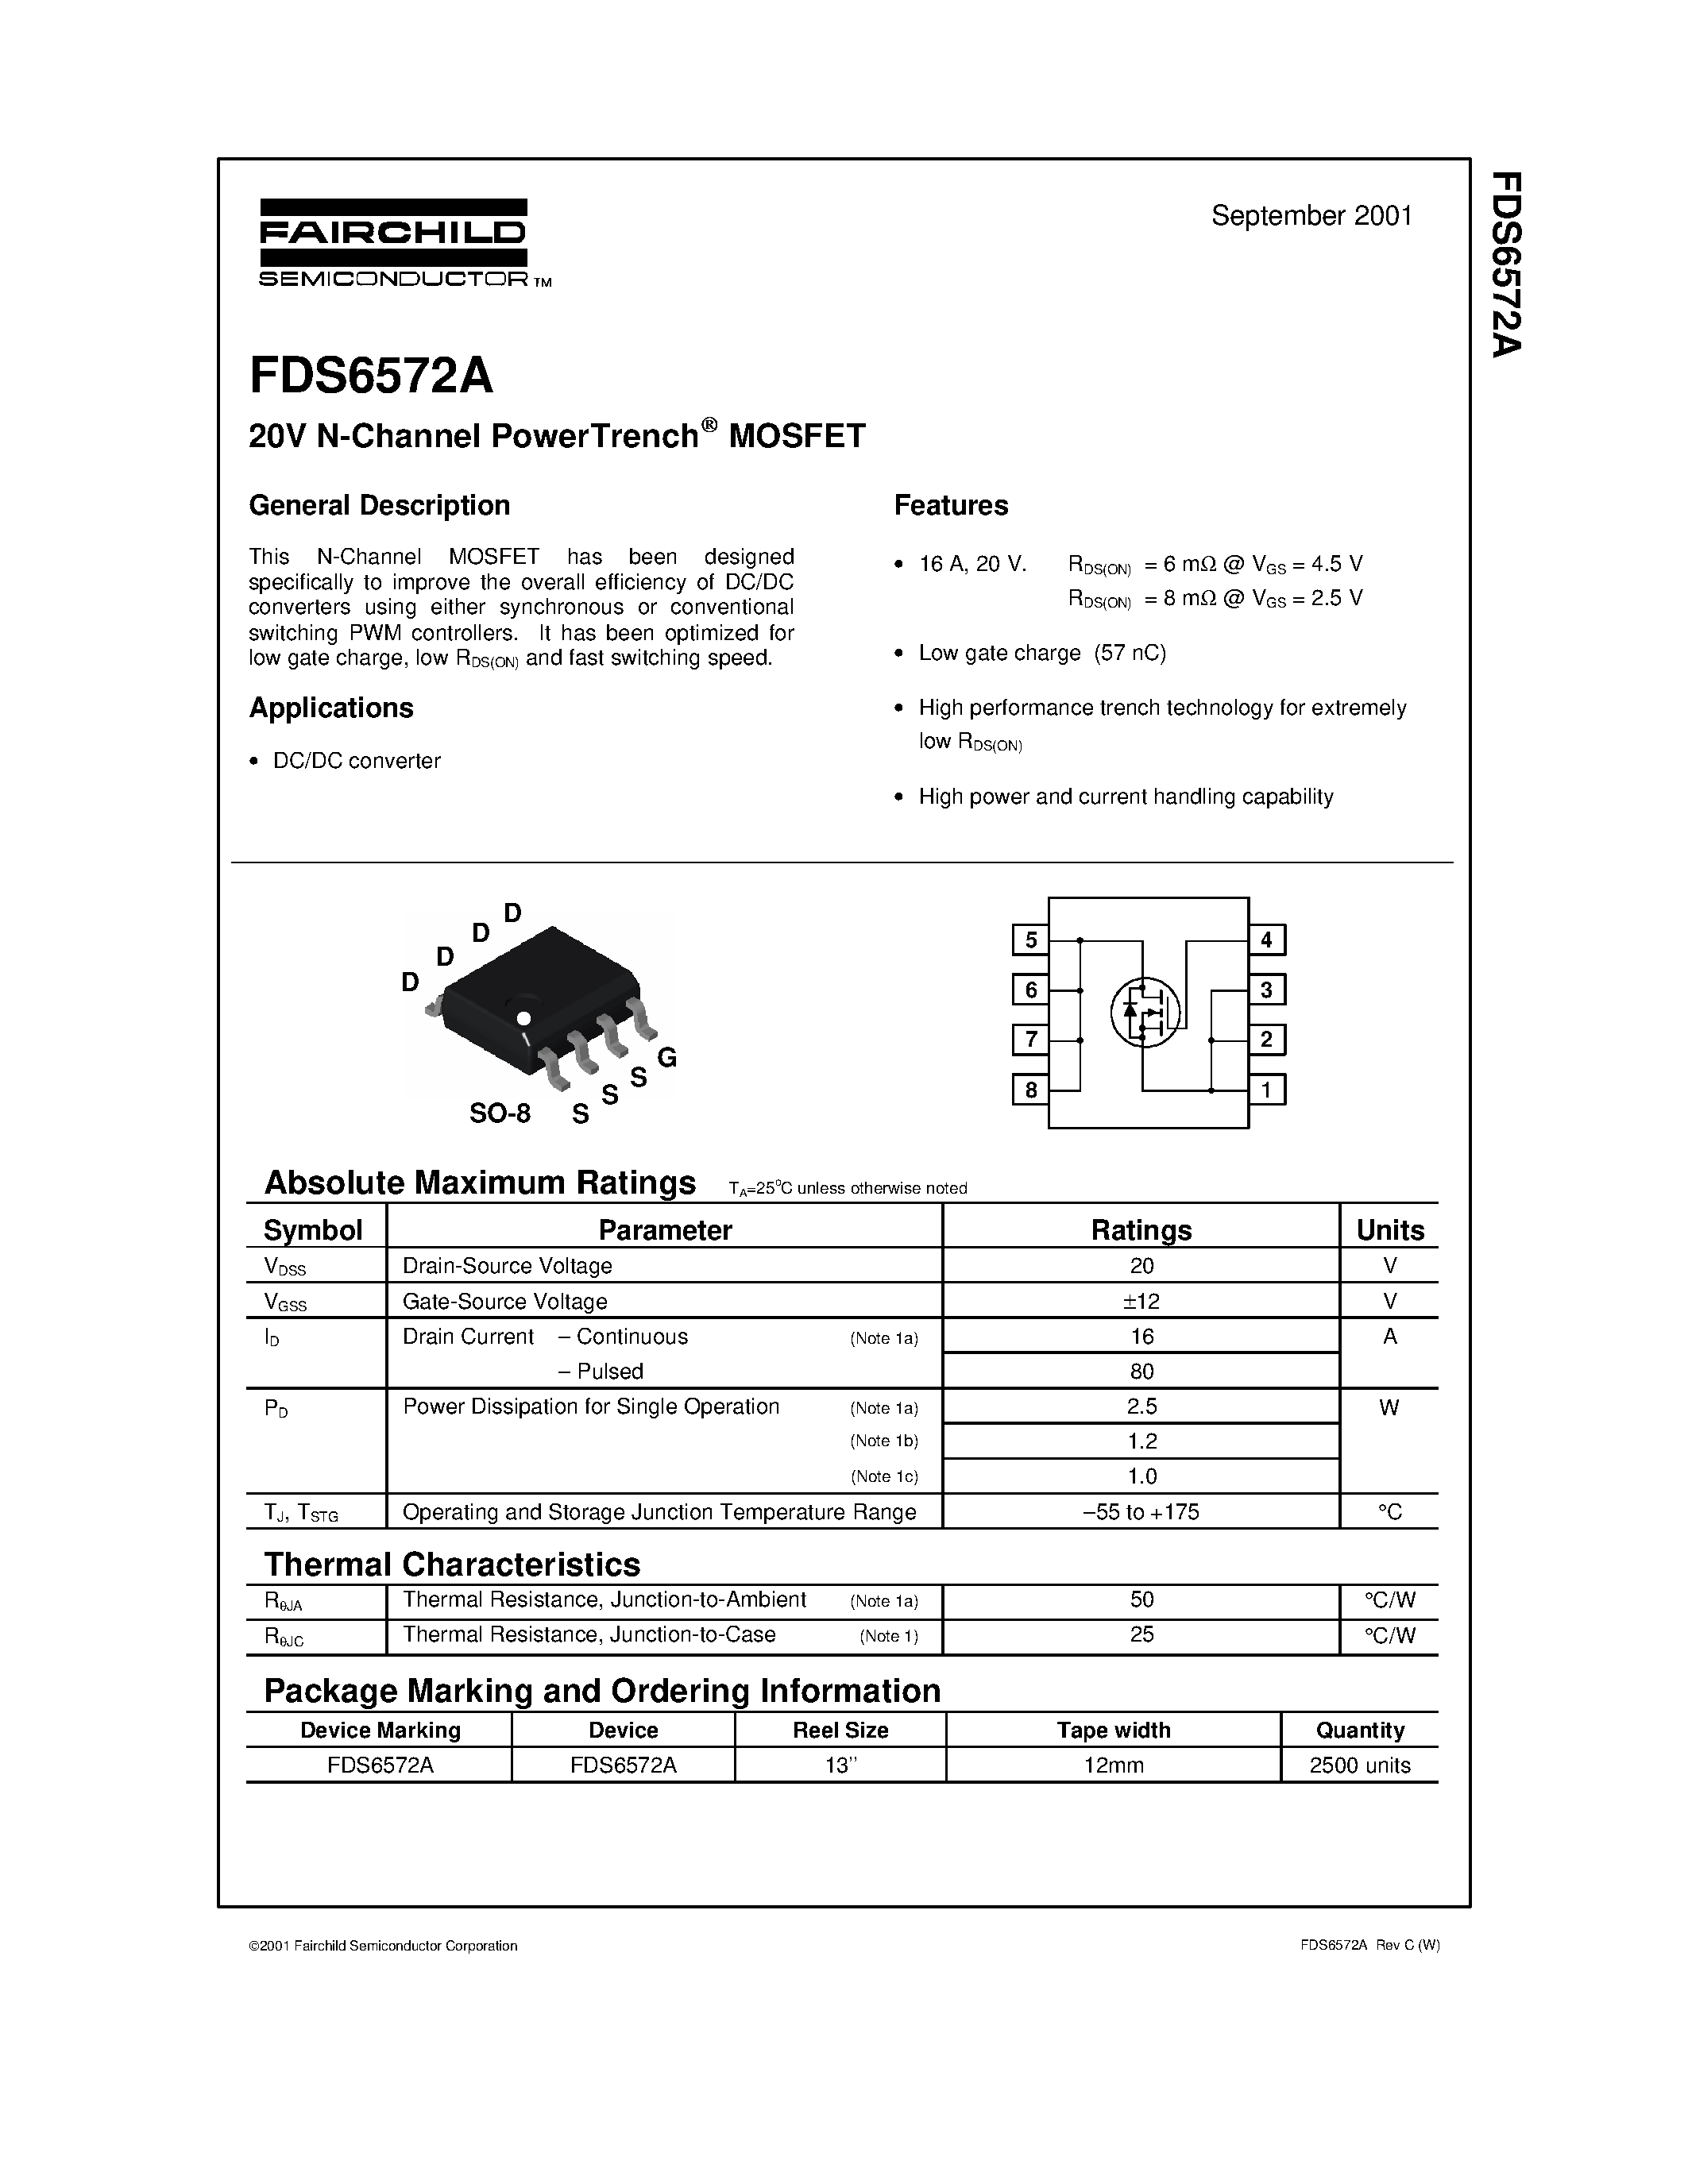 Datasheet FDS6572A - 20V N-Channel PowerTrench MOSFET page 1